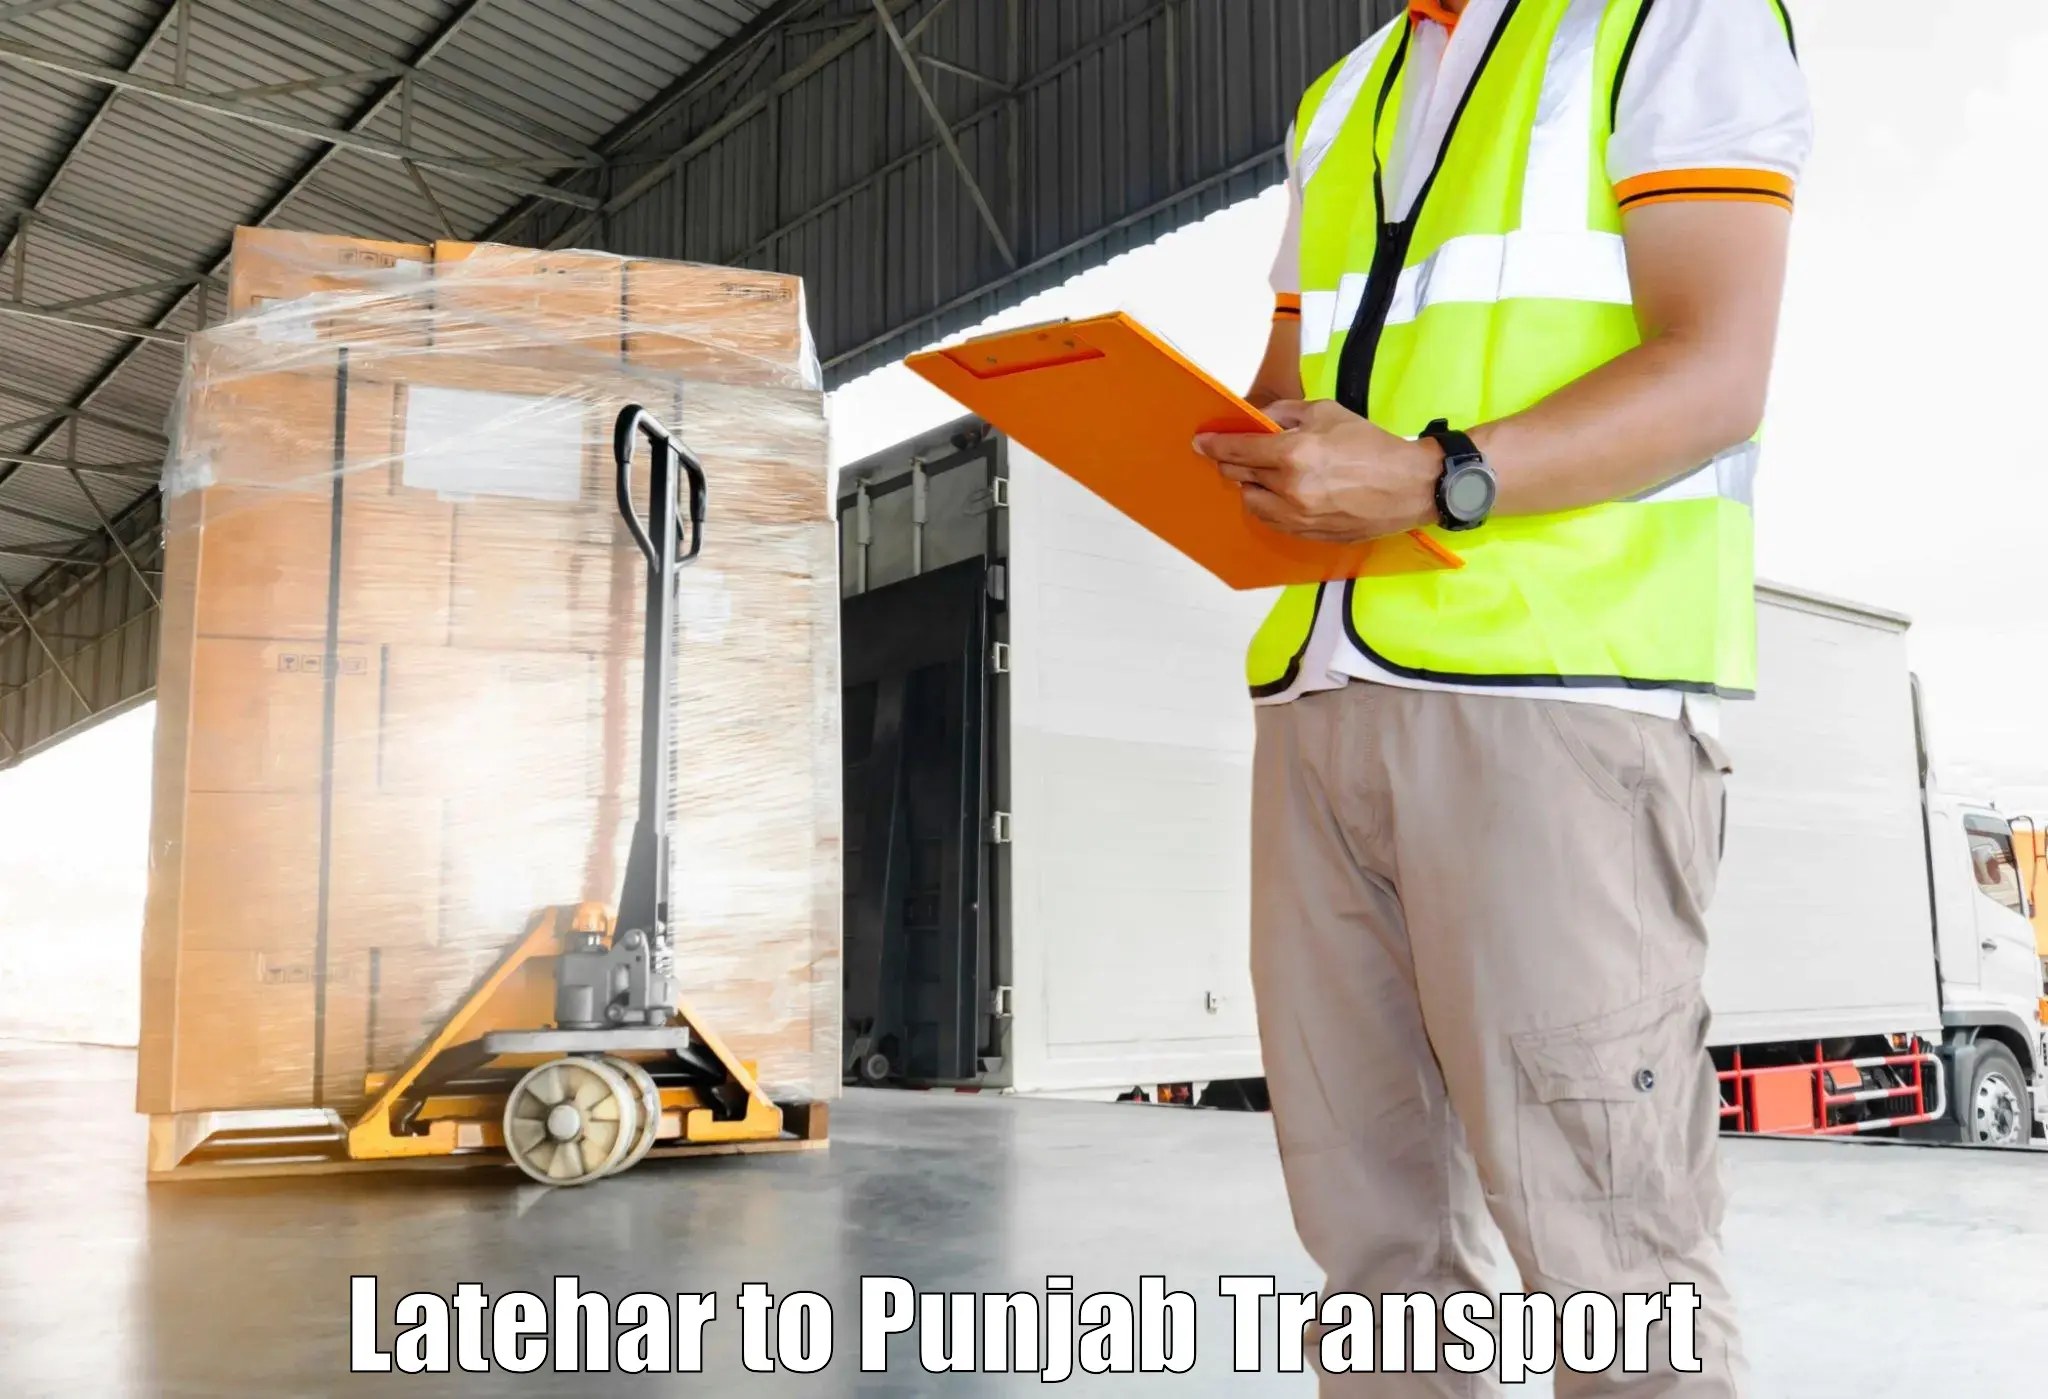 Container transport service Latehar to Pathankot